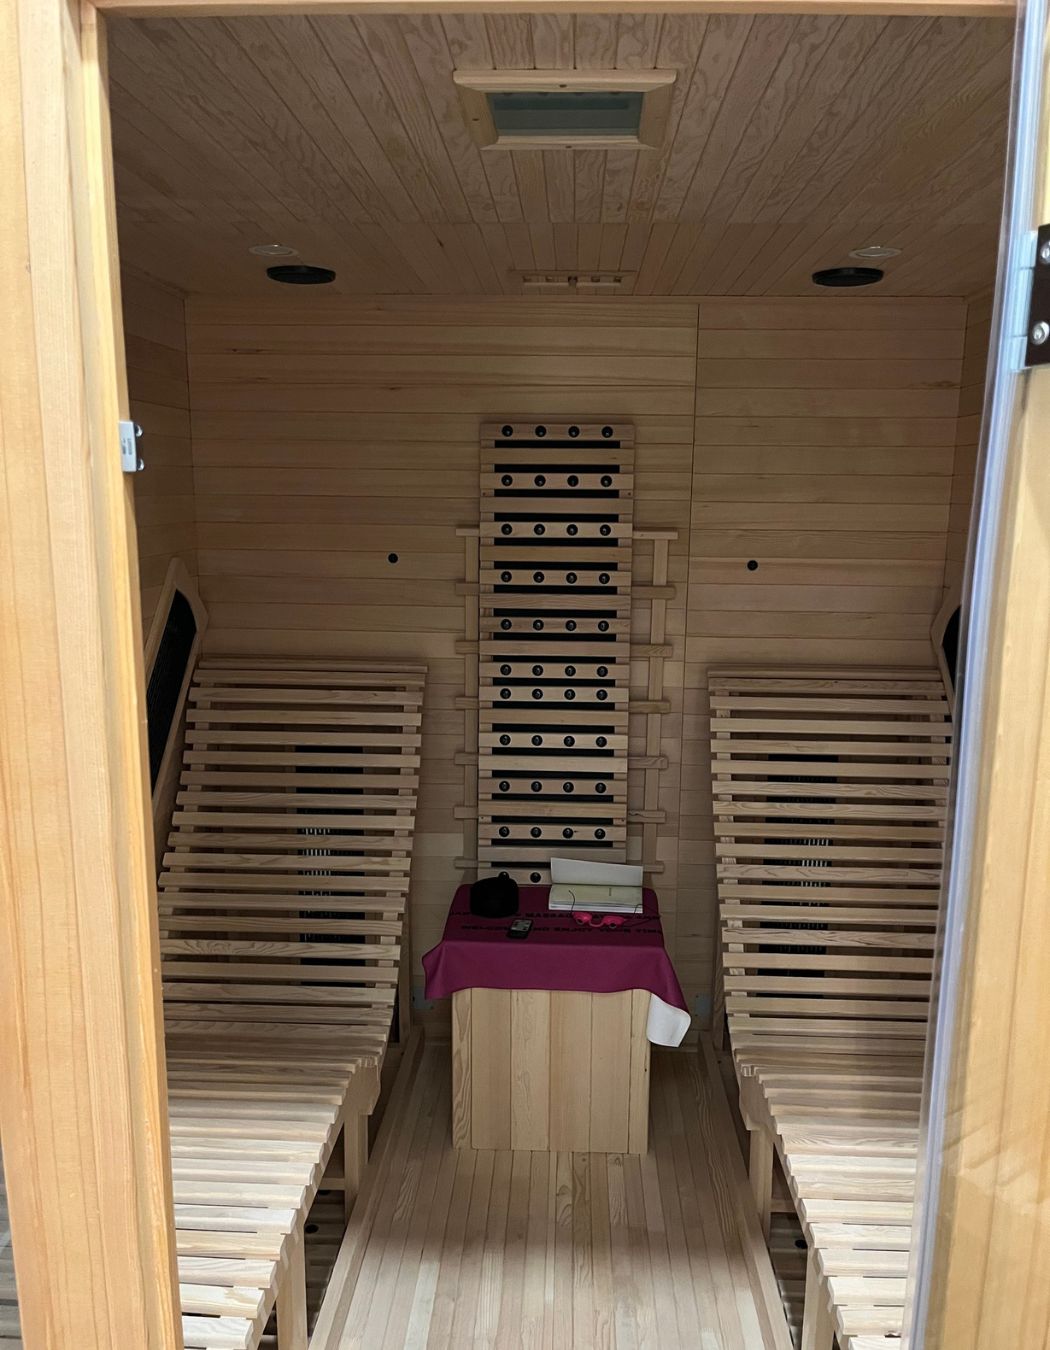 Infrared Sauna + near me 85204, Infrared Sauna + near me 85253, infrared sauna Arizona, affordable Infrared sauna Arizona, 85204 + Sauna, 85204 + infrared sauna, best infrared sauna in the city